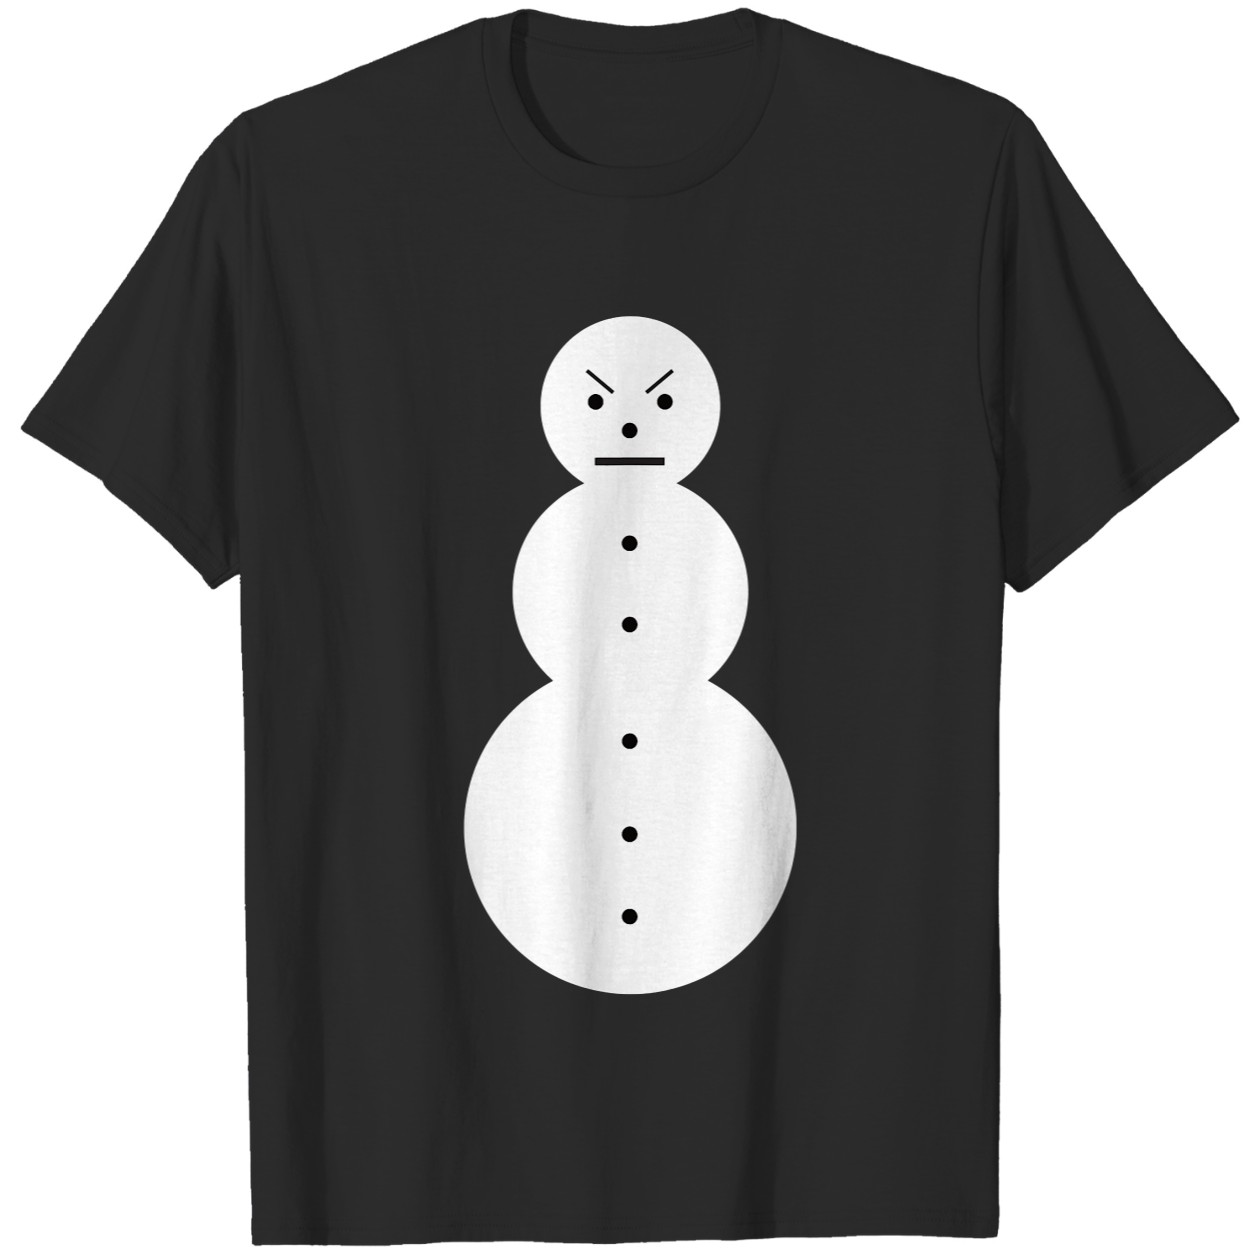 Funny Angry Jeezy Snowman Graphic Tee DZT